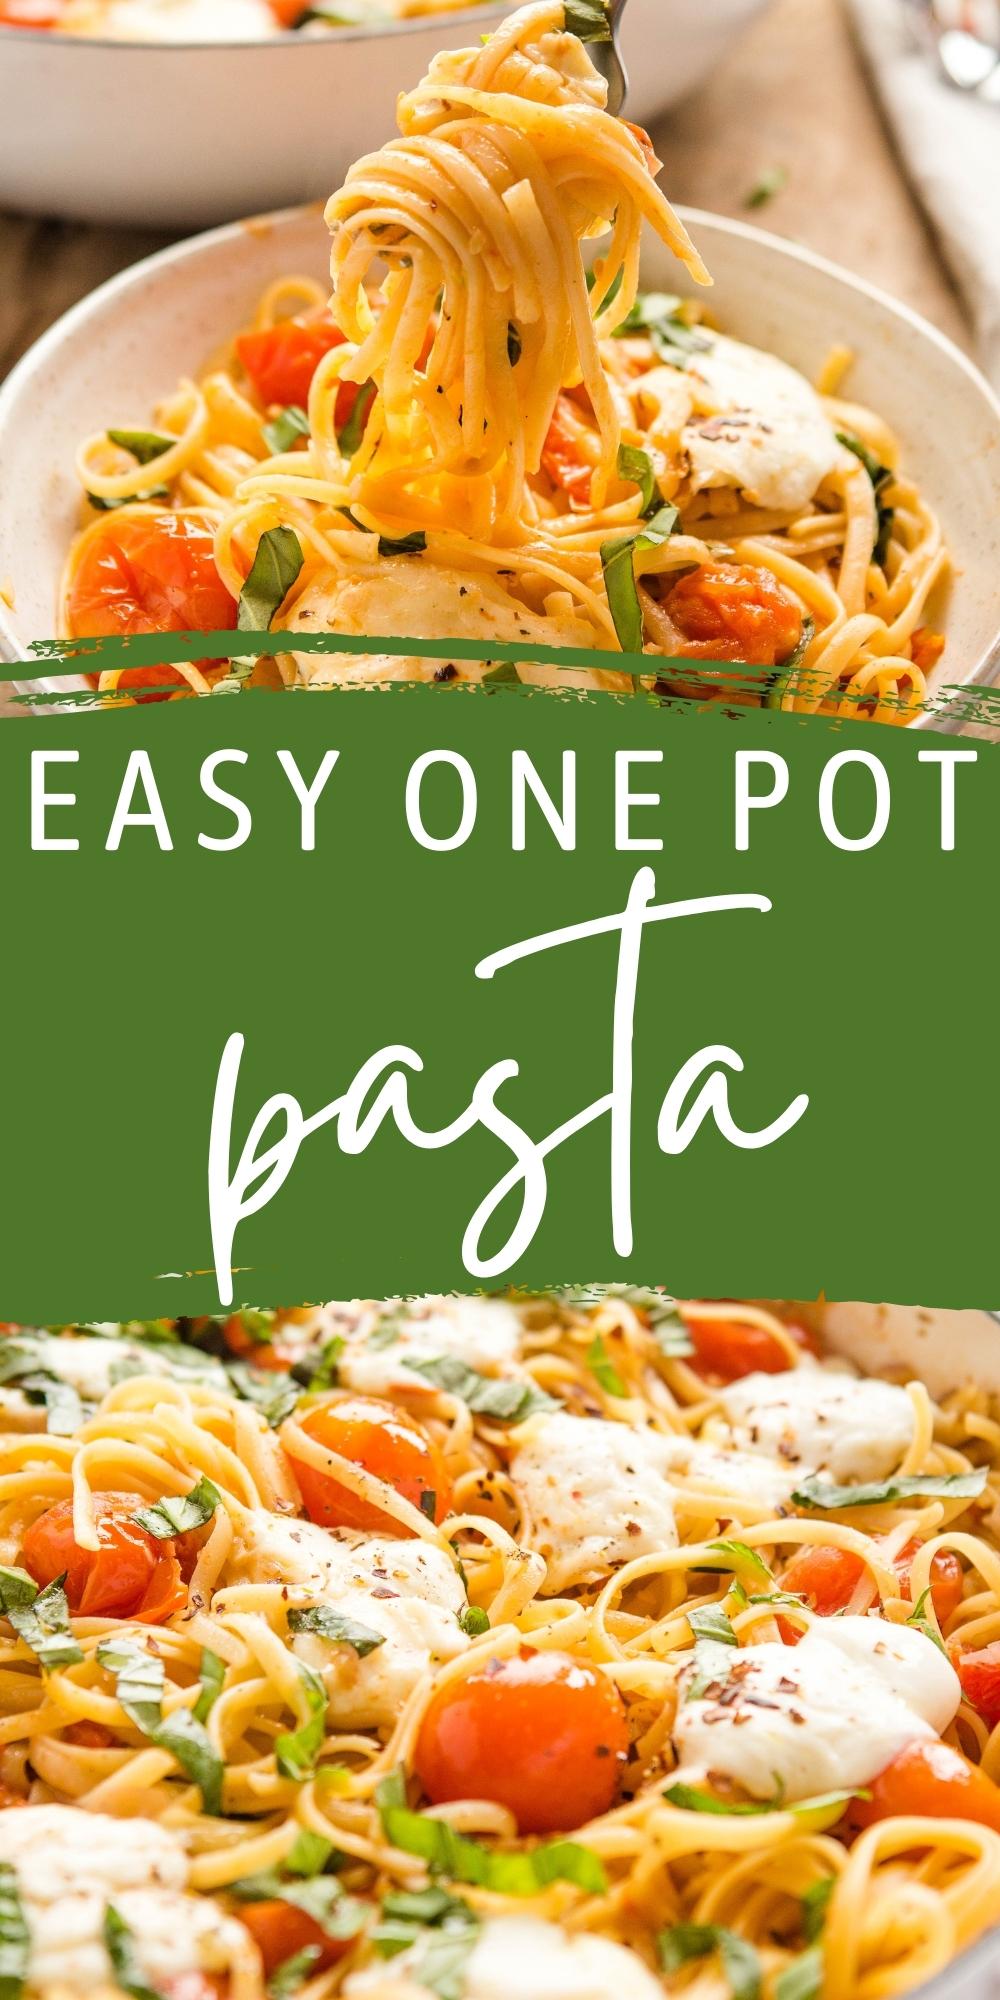 This One Pot Pasta is the best easy meal idea - simple pasta with basil, tomatoes, and fresh mozzarella - made in one pot in under 20 minutes. Recipe from thebusybaker.ca! #onepotpasta #easymeal #dinner #family #familymeal #onepot #onepan #pasta #mozzarella via @busybakerblog